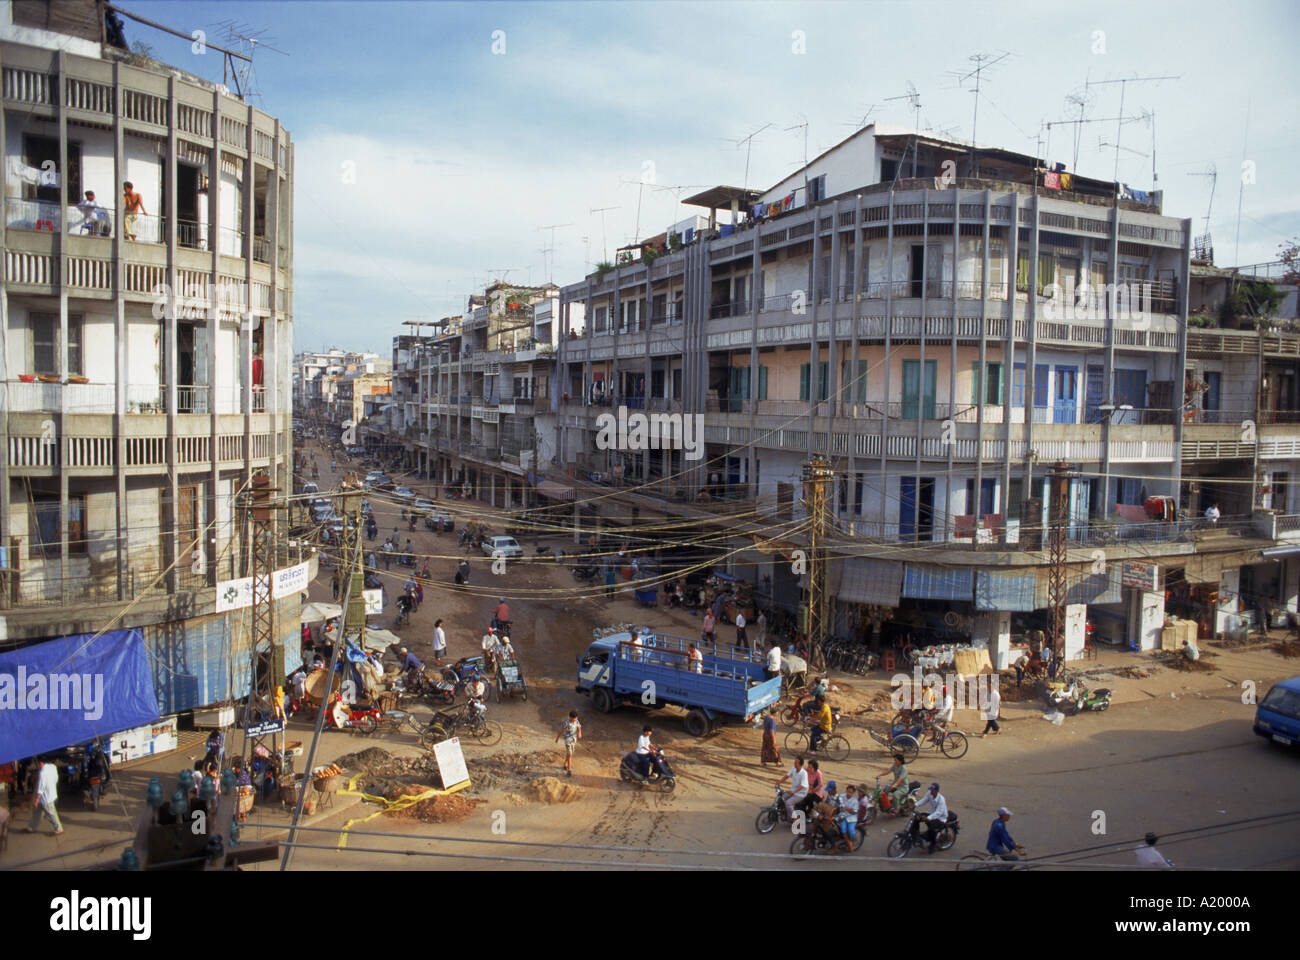 Street scene in the centre of the city of Phnom Penh Cambodia Asia G Hellier Stock Photo